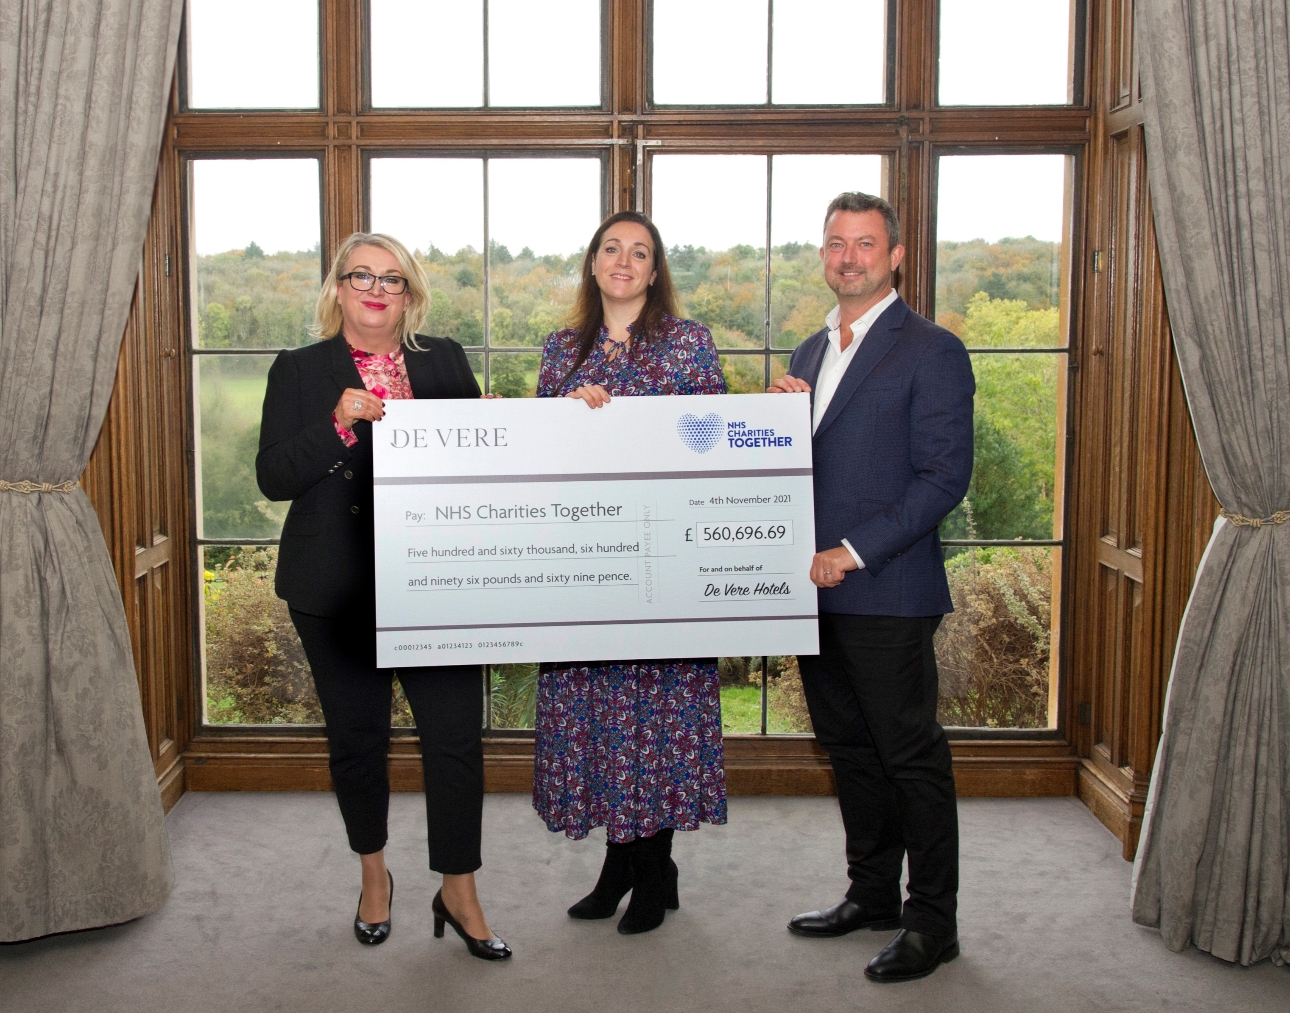 De Vere donates over half a million pounds to NHS Charities Together CEO and CFO